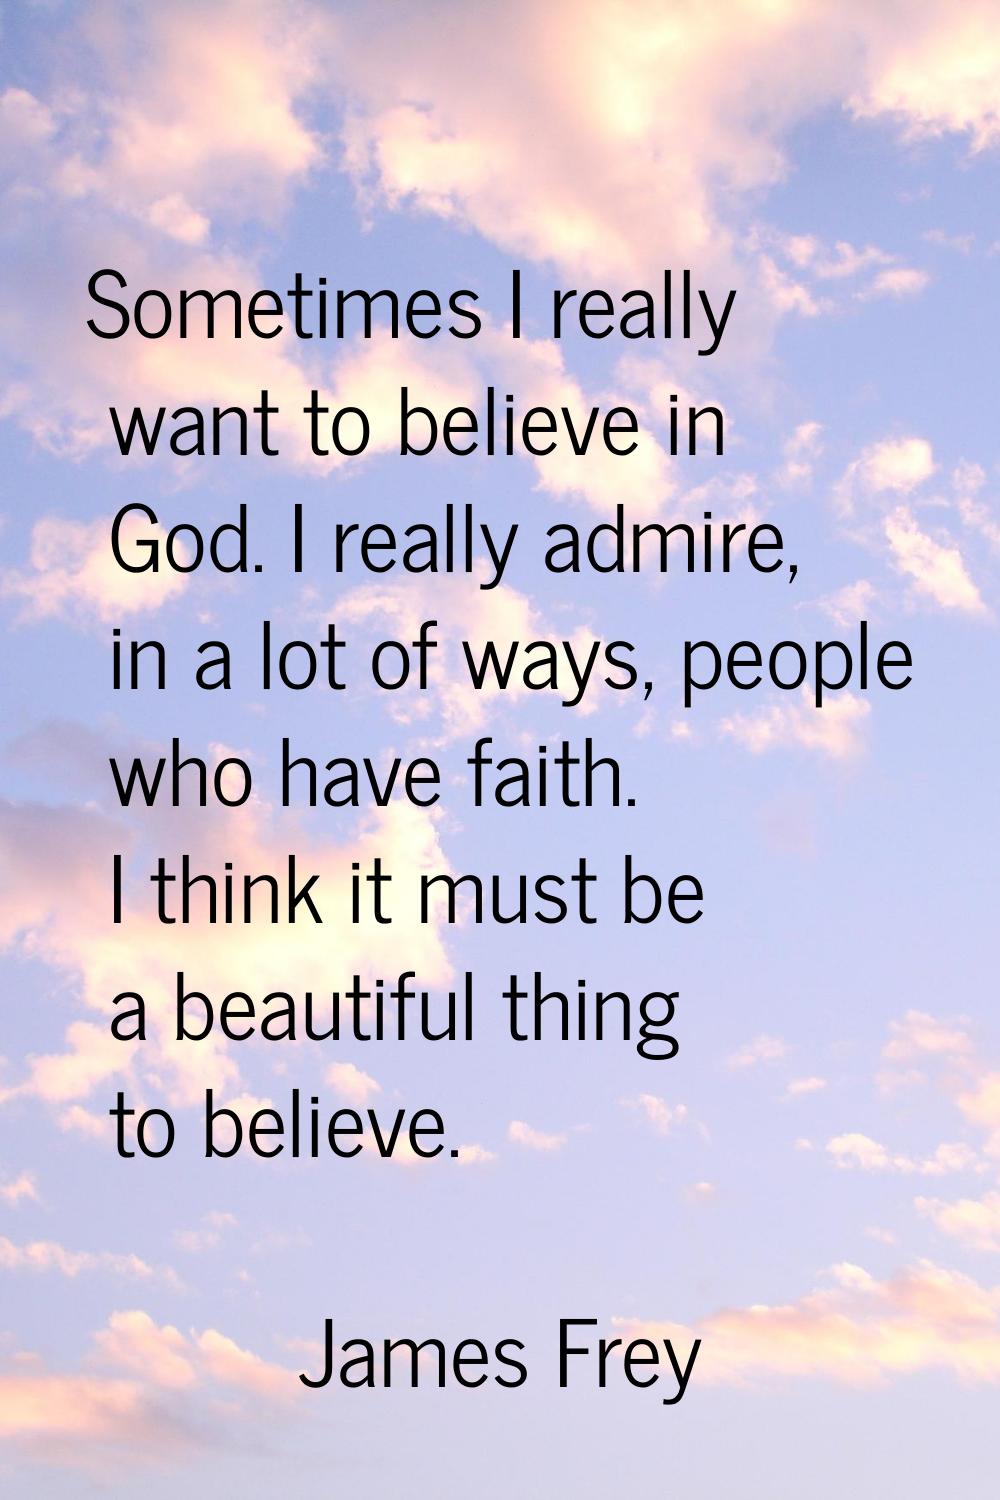 Sometimes I really want to believe in God. I really admire, in a lot of ways, people who have faith